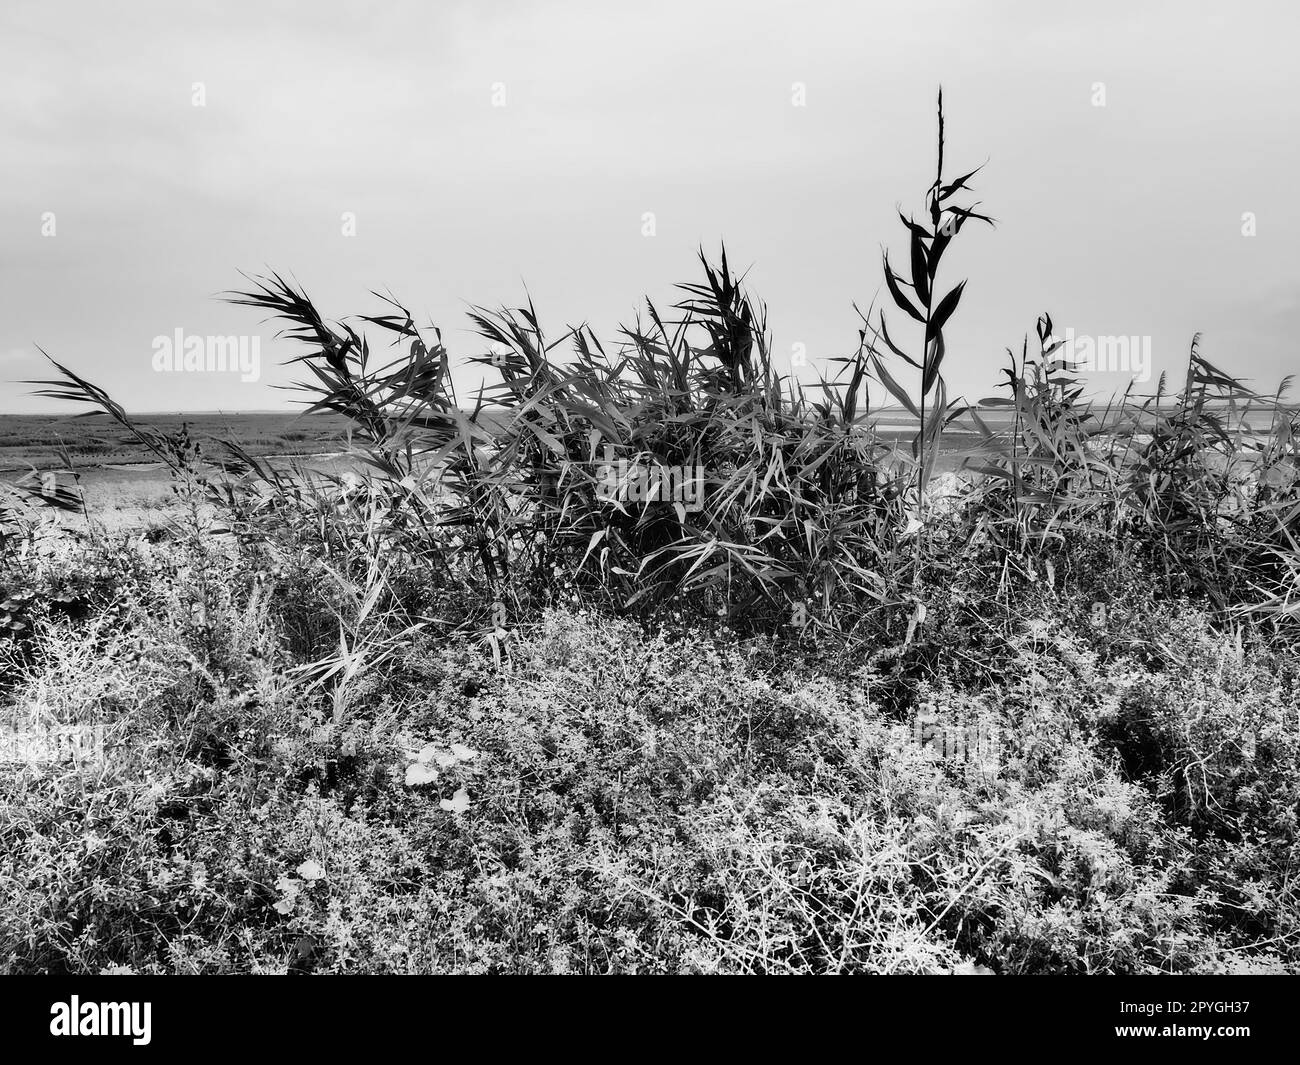 Common reed, or southern reed, Phragmites australis, a tall perennial grass of the genus Reed. Flora of the estuary. Black and white monochrome. Soils with close standing groundwater. Stormy weather. Stock Photo